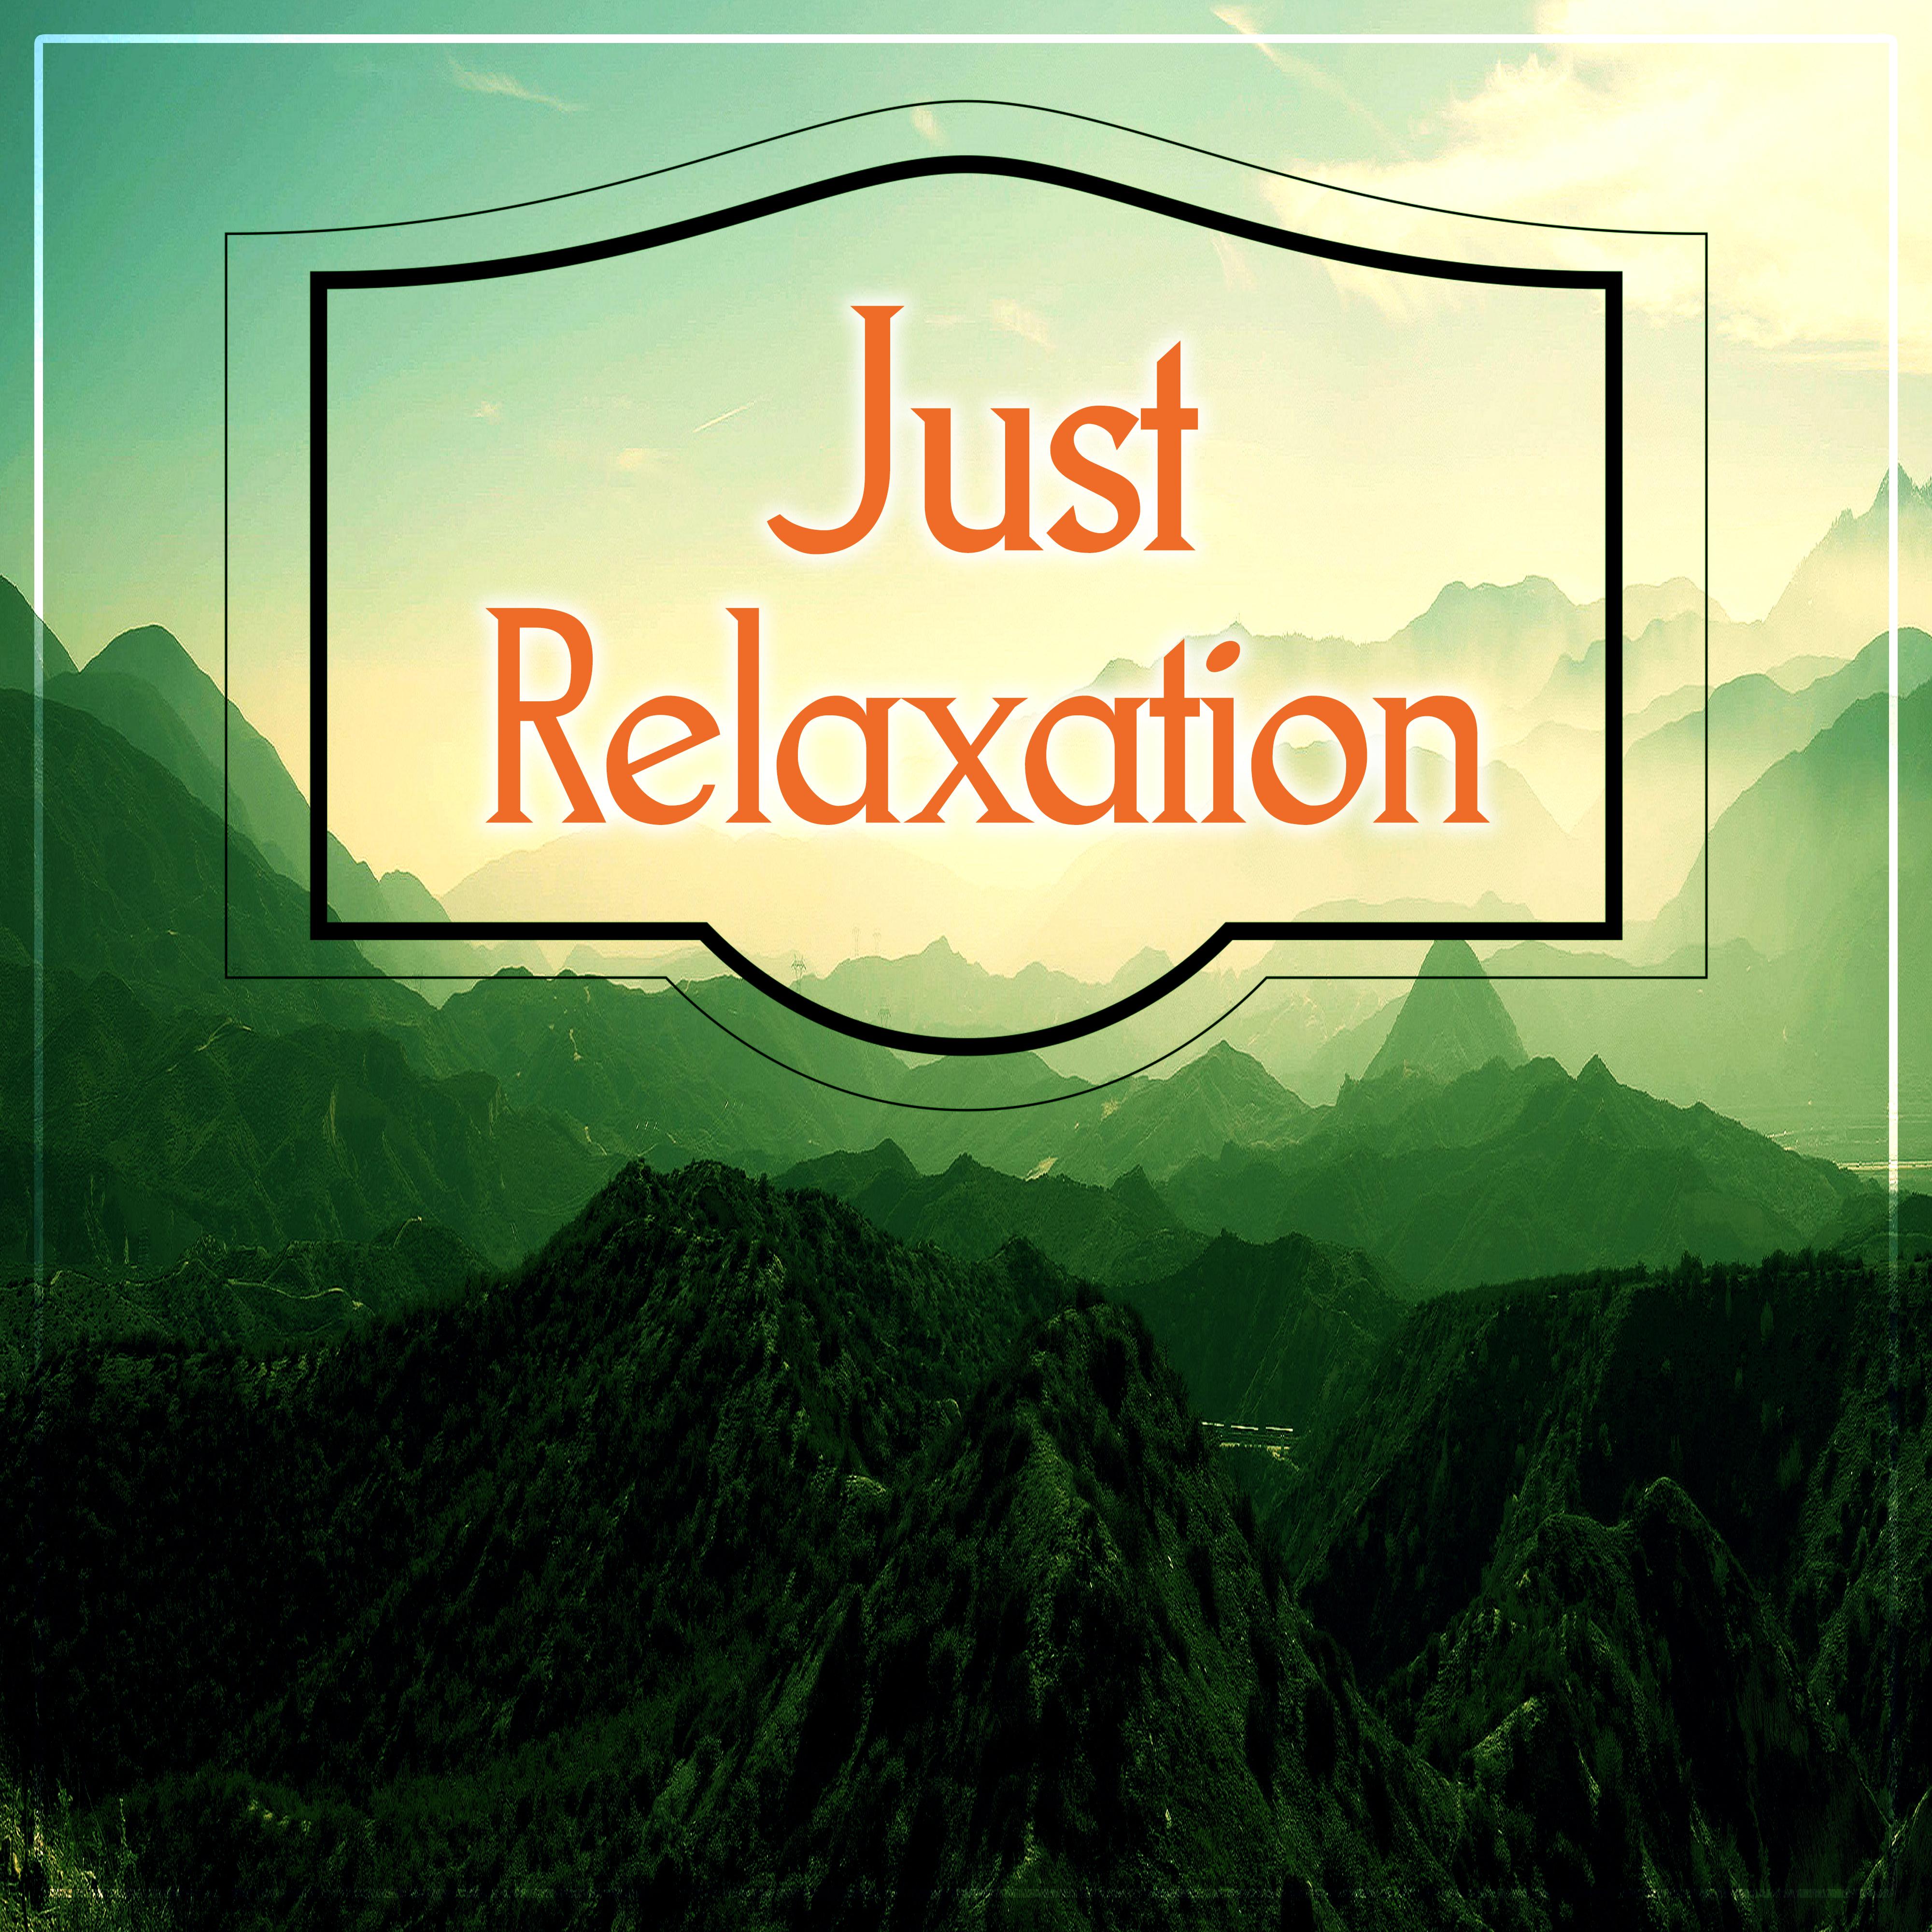 Just Relaxation  New Age Healing Music for Relaxing Therapy, Peaceful Sounds, Rest after Heavy Day, Nature Sounds